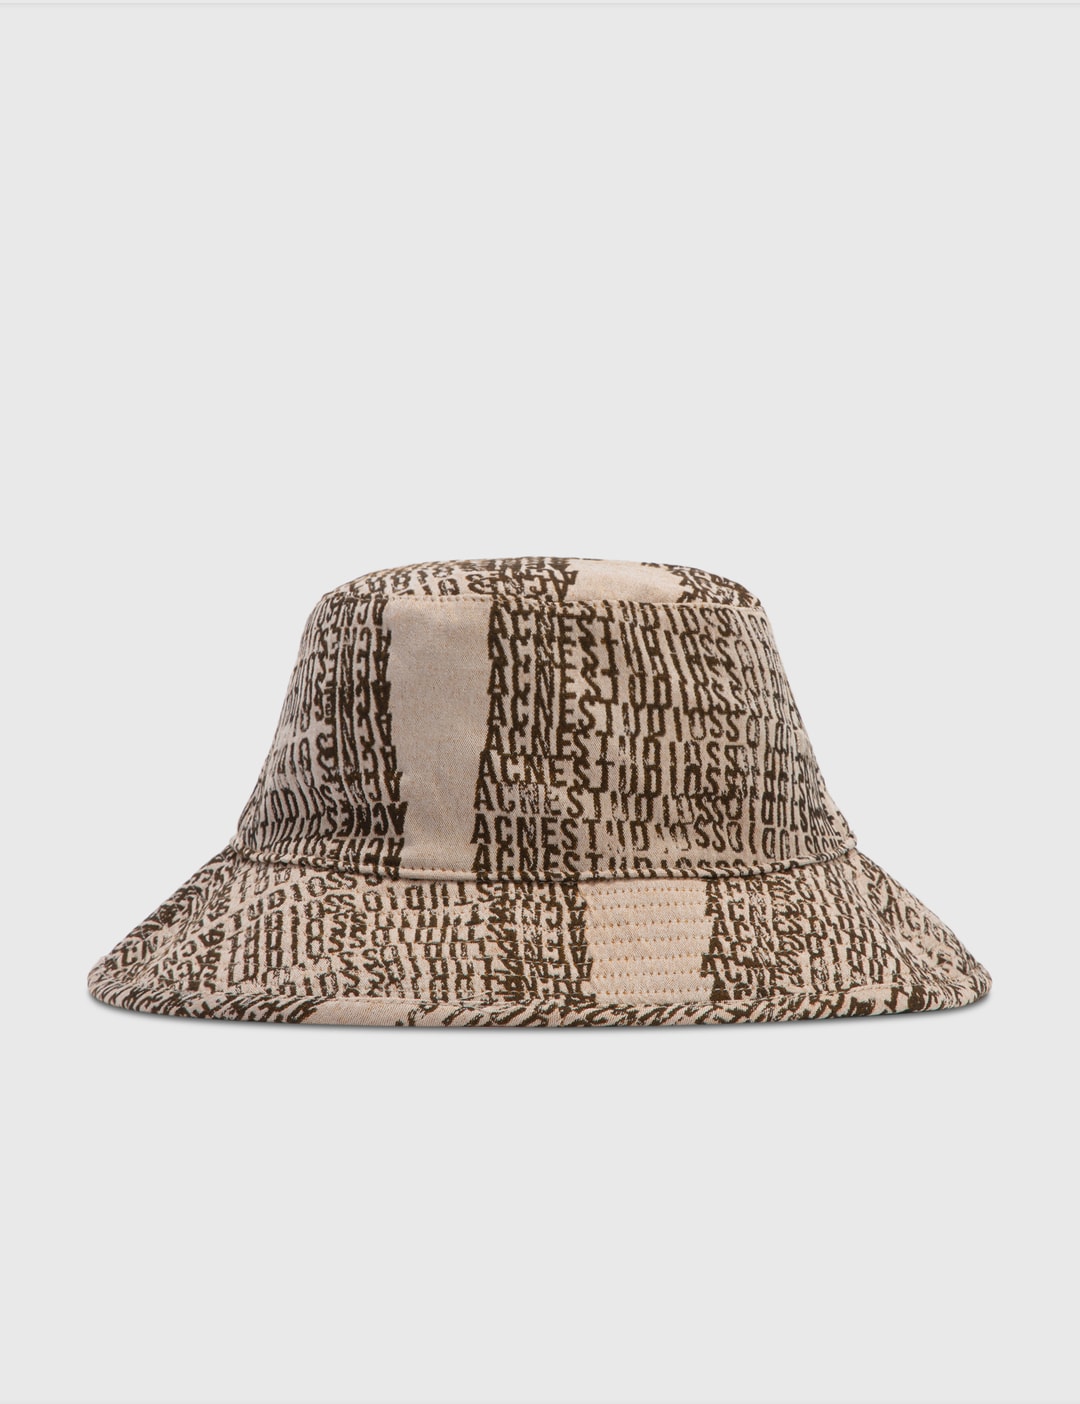 Acne Studios - Brimmo Logo Jacquard Bucket Hat | HBX - Globally Curated ...